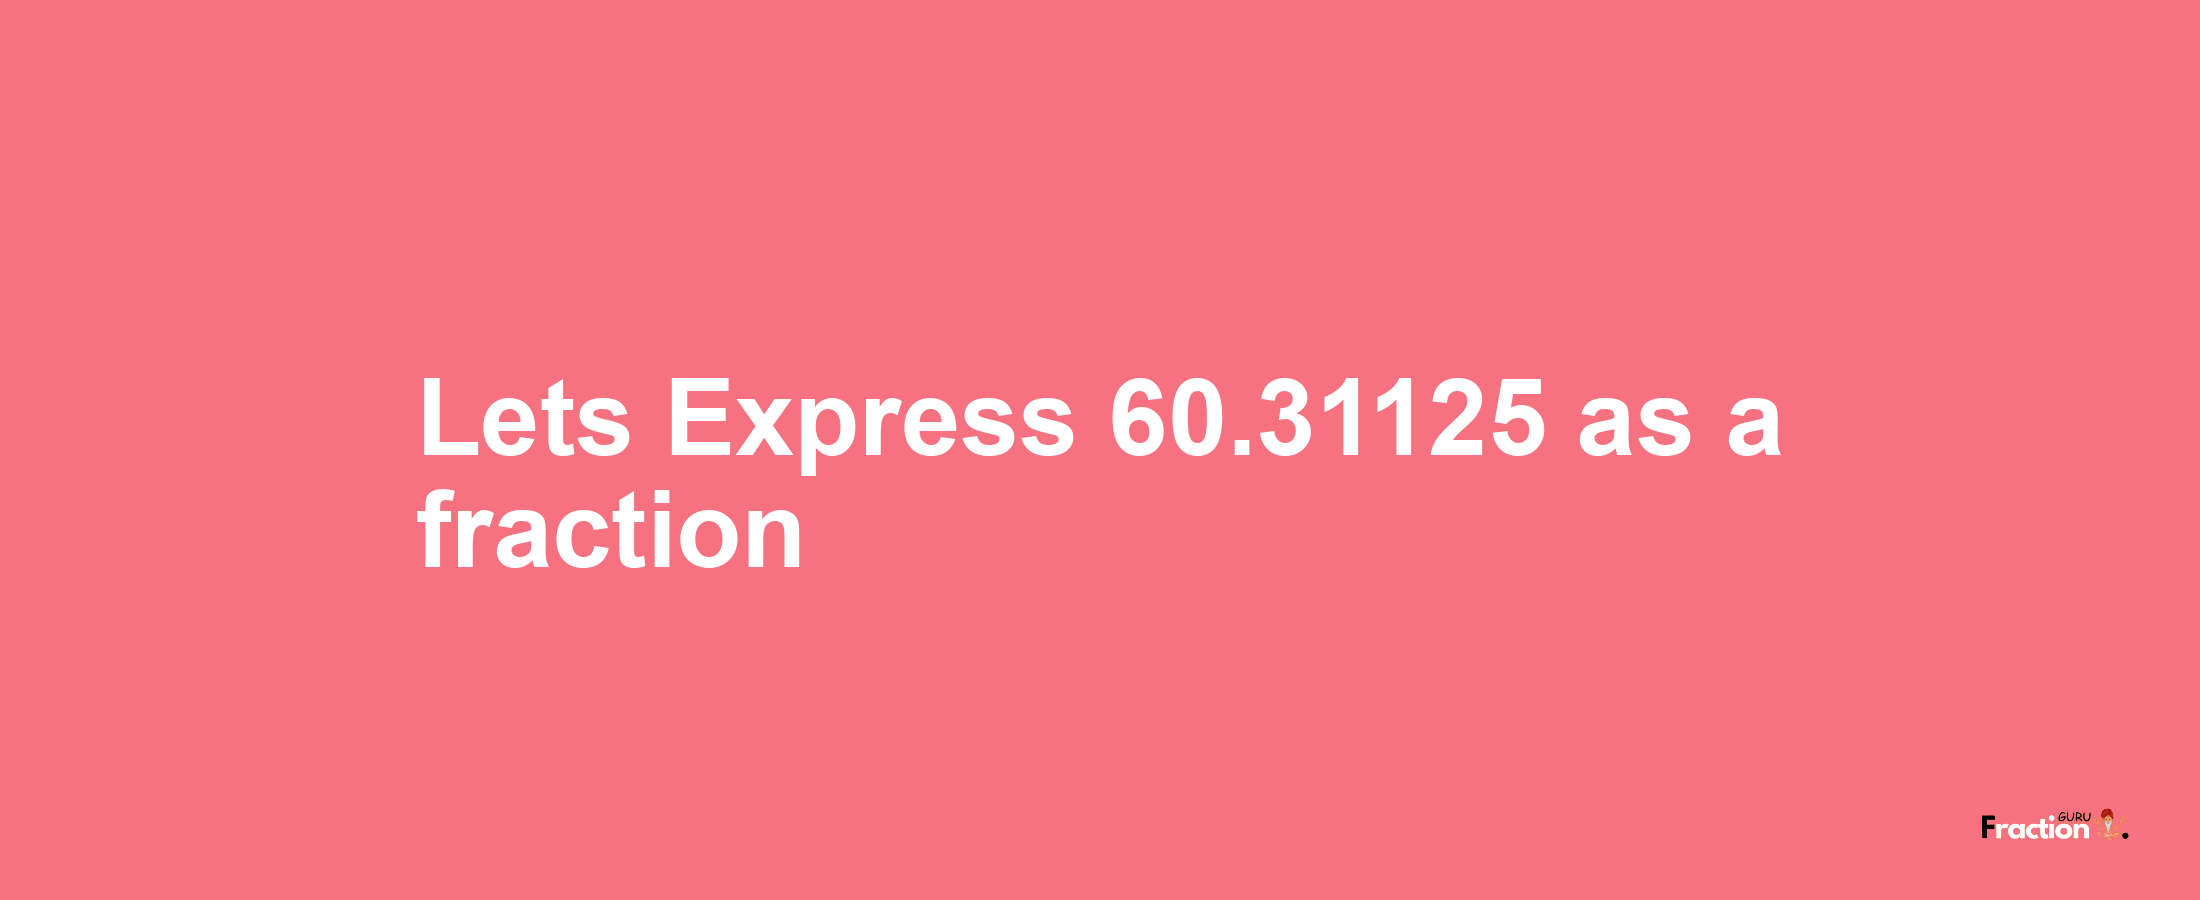 Lets Express 60.31125 as afraction